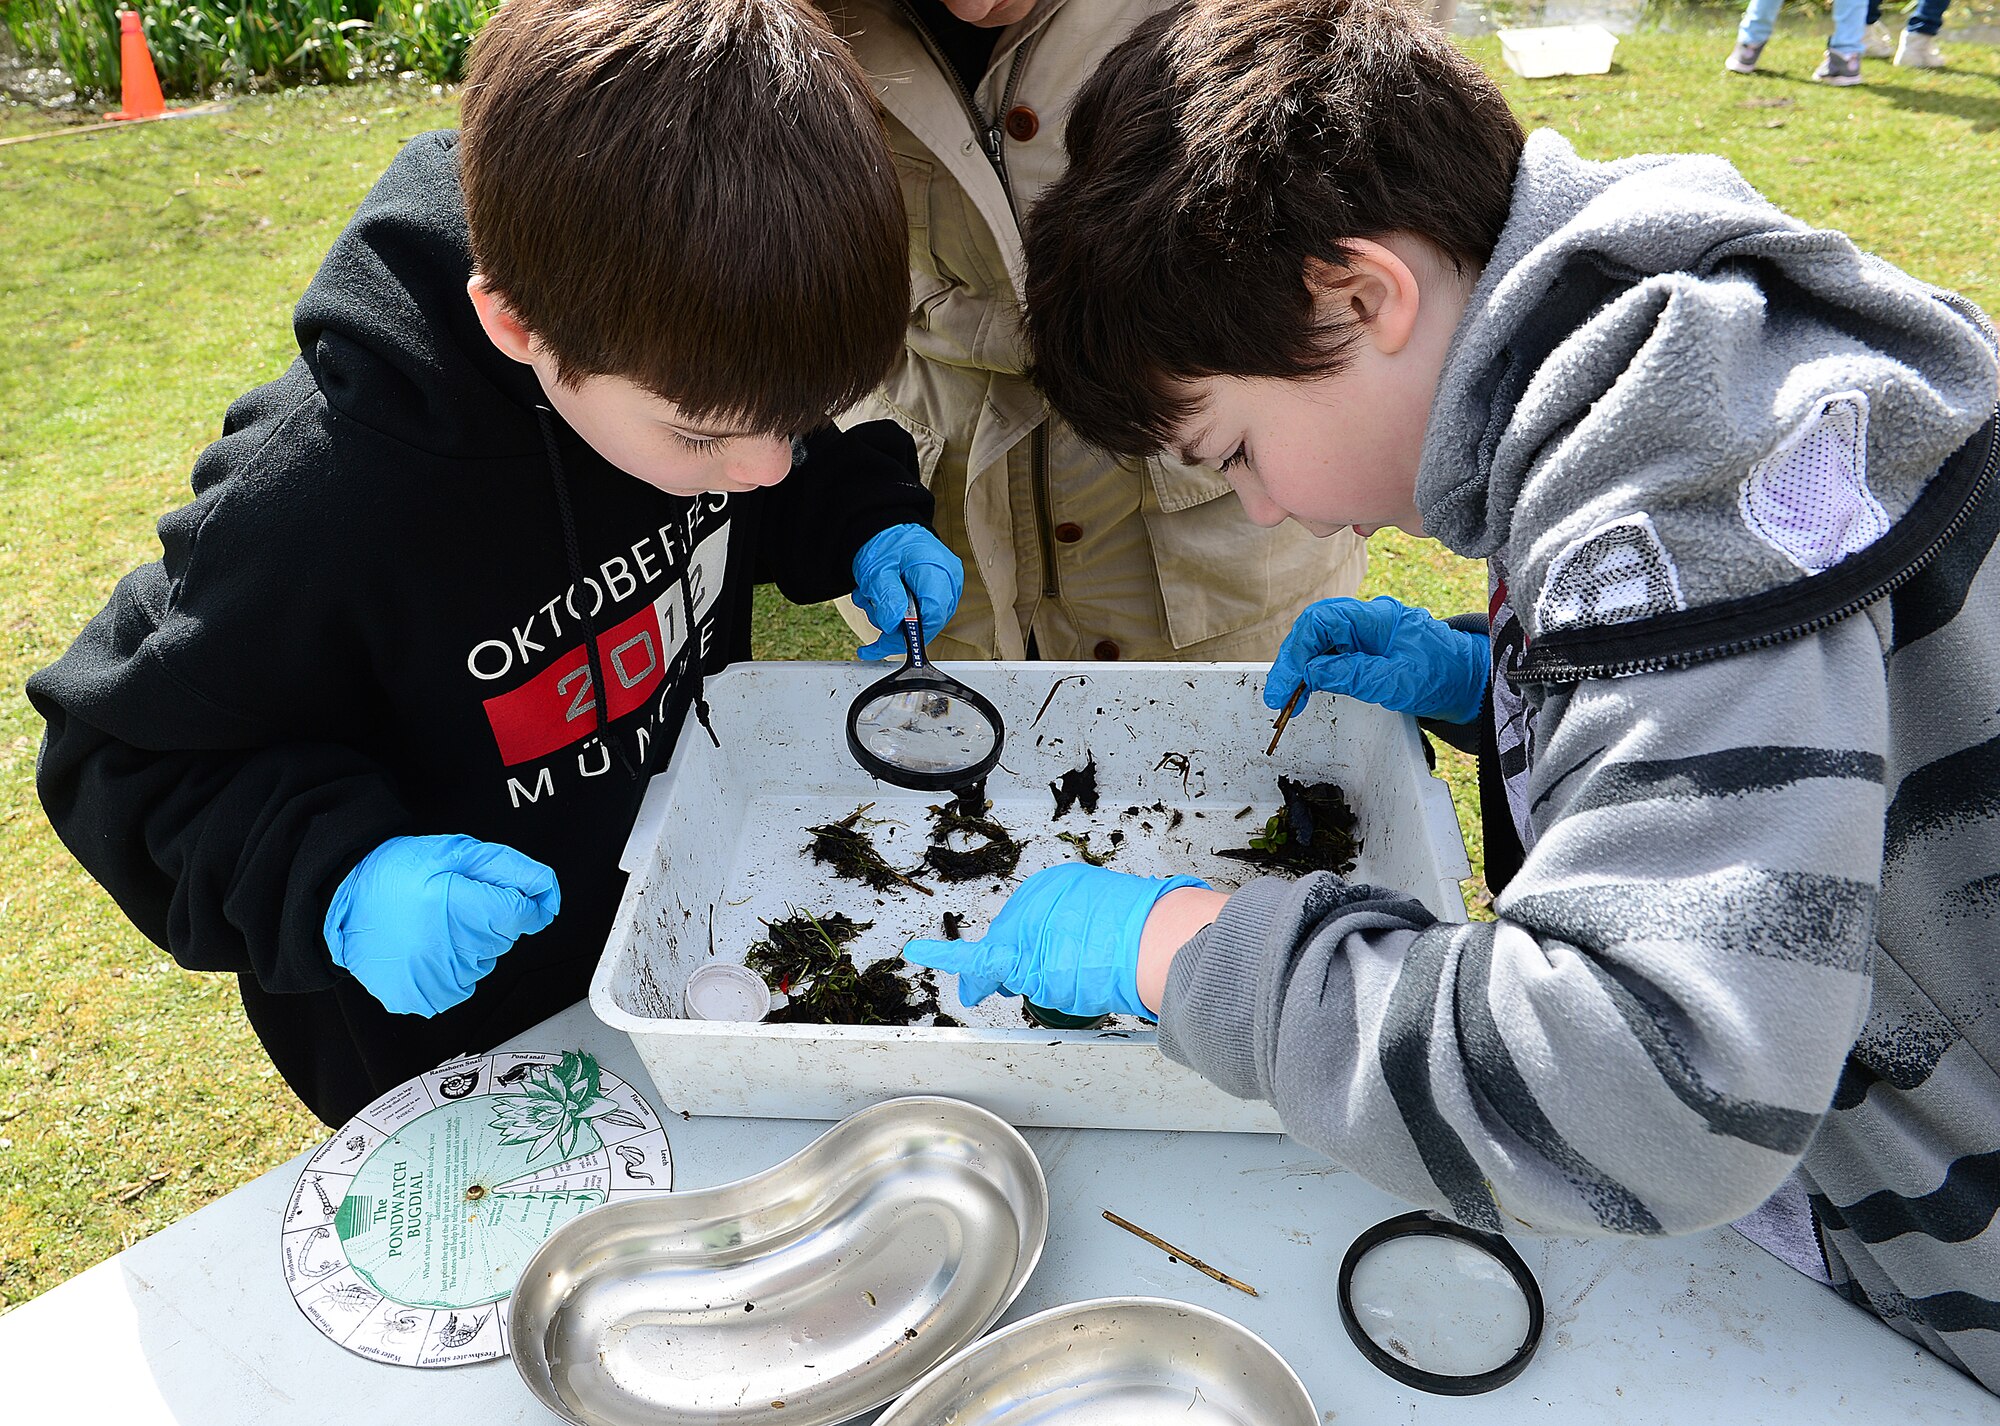 ROYAL AIR FORCE LAKENHEATH, England— Duncan Norwood, son of Maj. David Norwood 48th Medical Surgical Squadron, and Jonathan VanHouten, son of Master Sgt. Andrew VanHouten, 48th Fighter Wing, examine pond shrimp that they collected at Defenders Park during a pond dipping activity for Earth Week, April 18, 2013.  A third grade class from RAF Lakenheath elementary school participated in a pond dipping activity in support of Earth Day. The children looked through algae they collected for pond creatures. (U.S. Air Force photo by Staff Sgt. Stephanie Mancha)